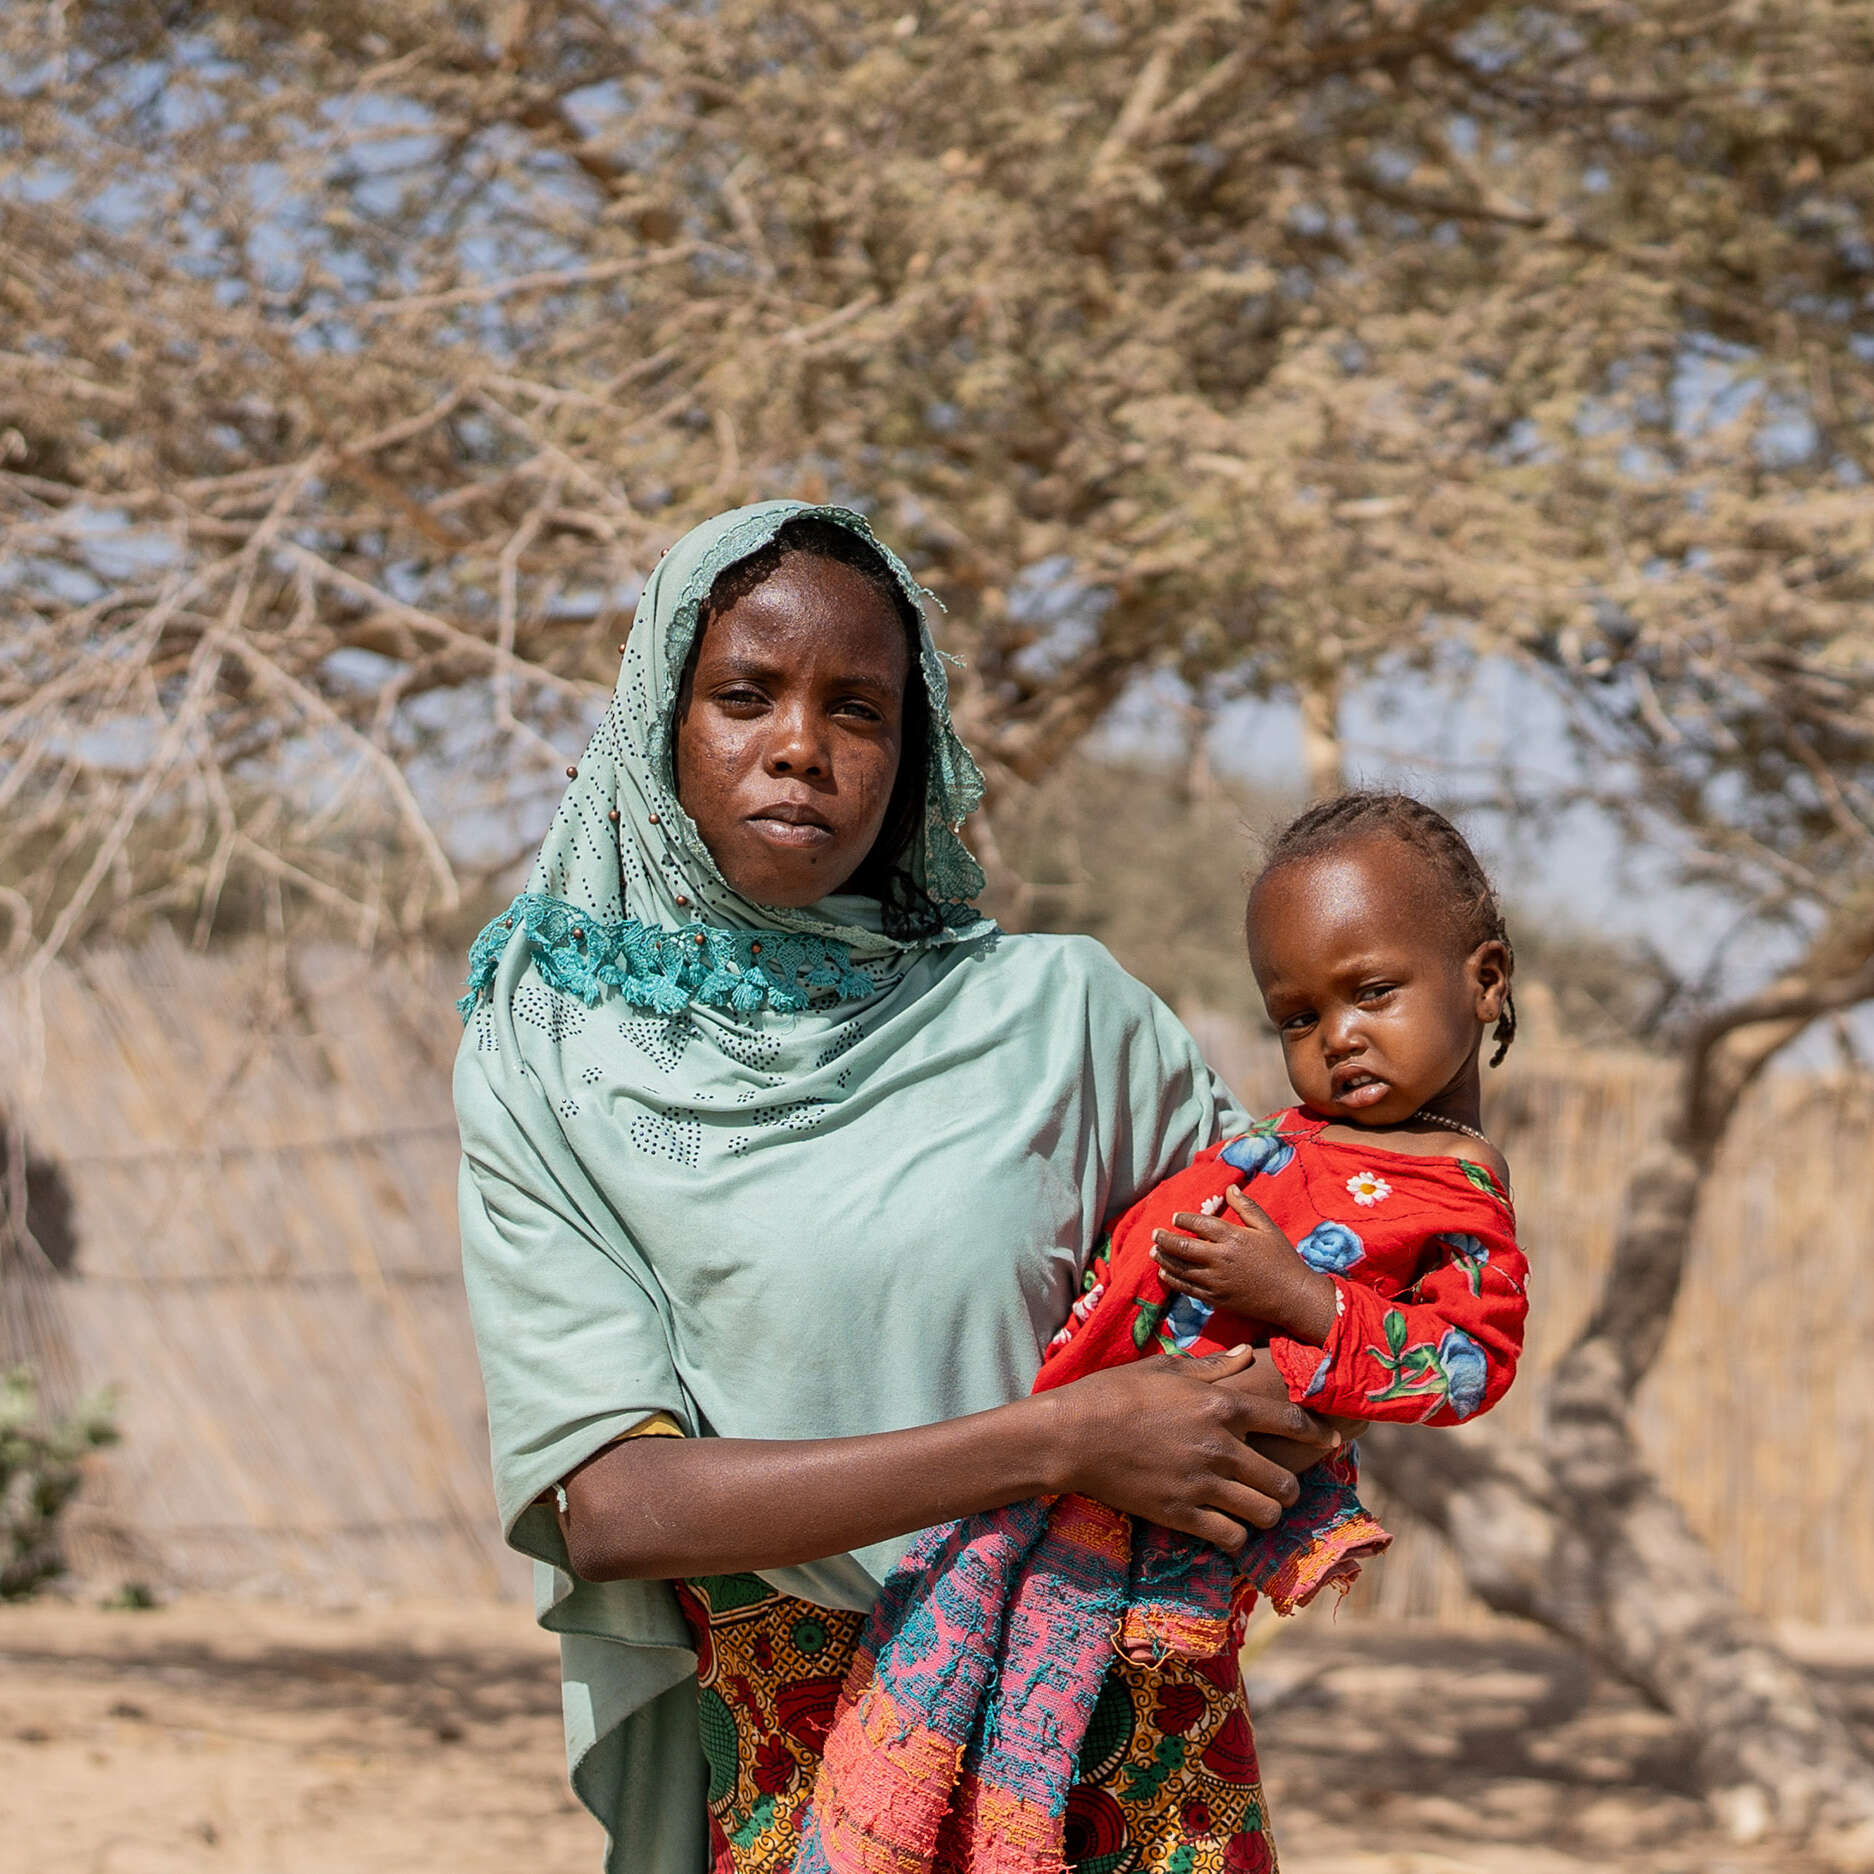 A Sudanese refugee and her one-year-old child in the dry landscape in Kafia, Chad, where IRC medical staff tested her daughter for malnutrition.